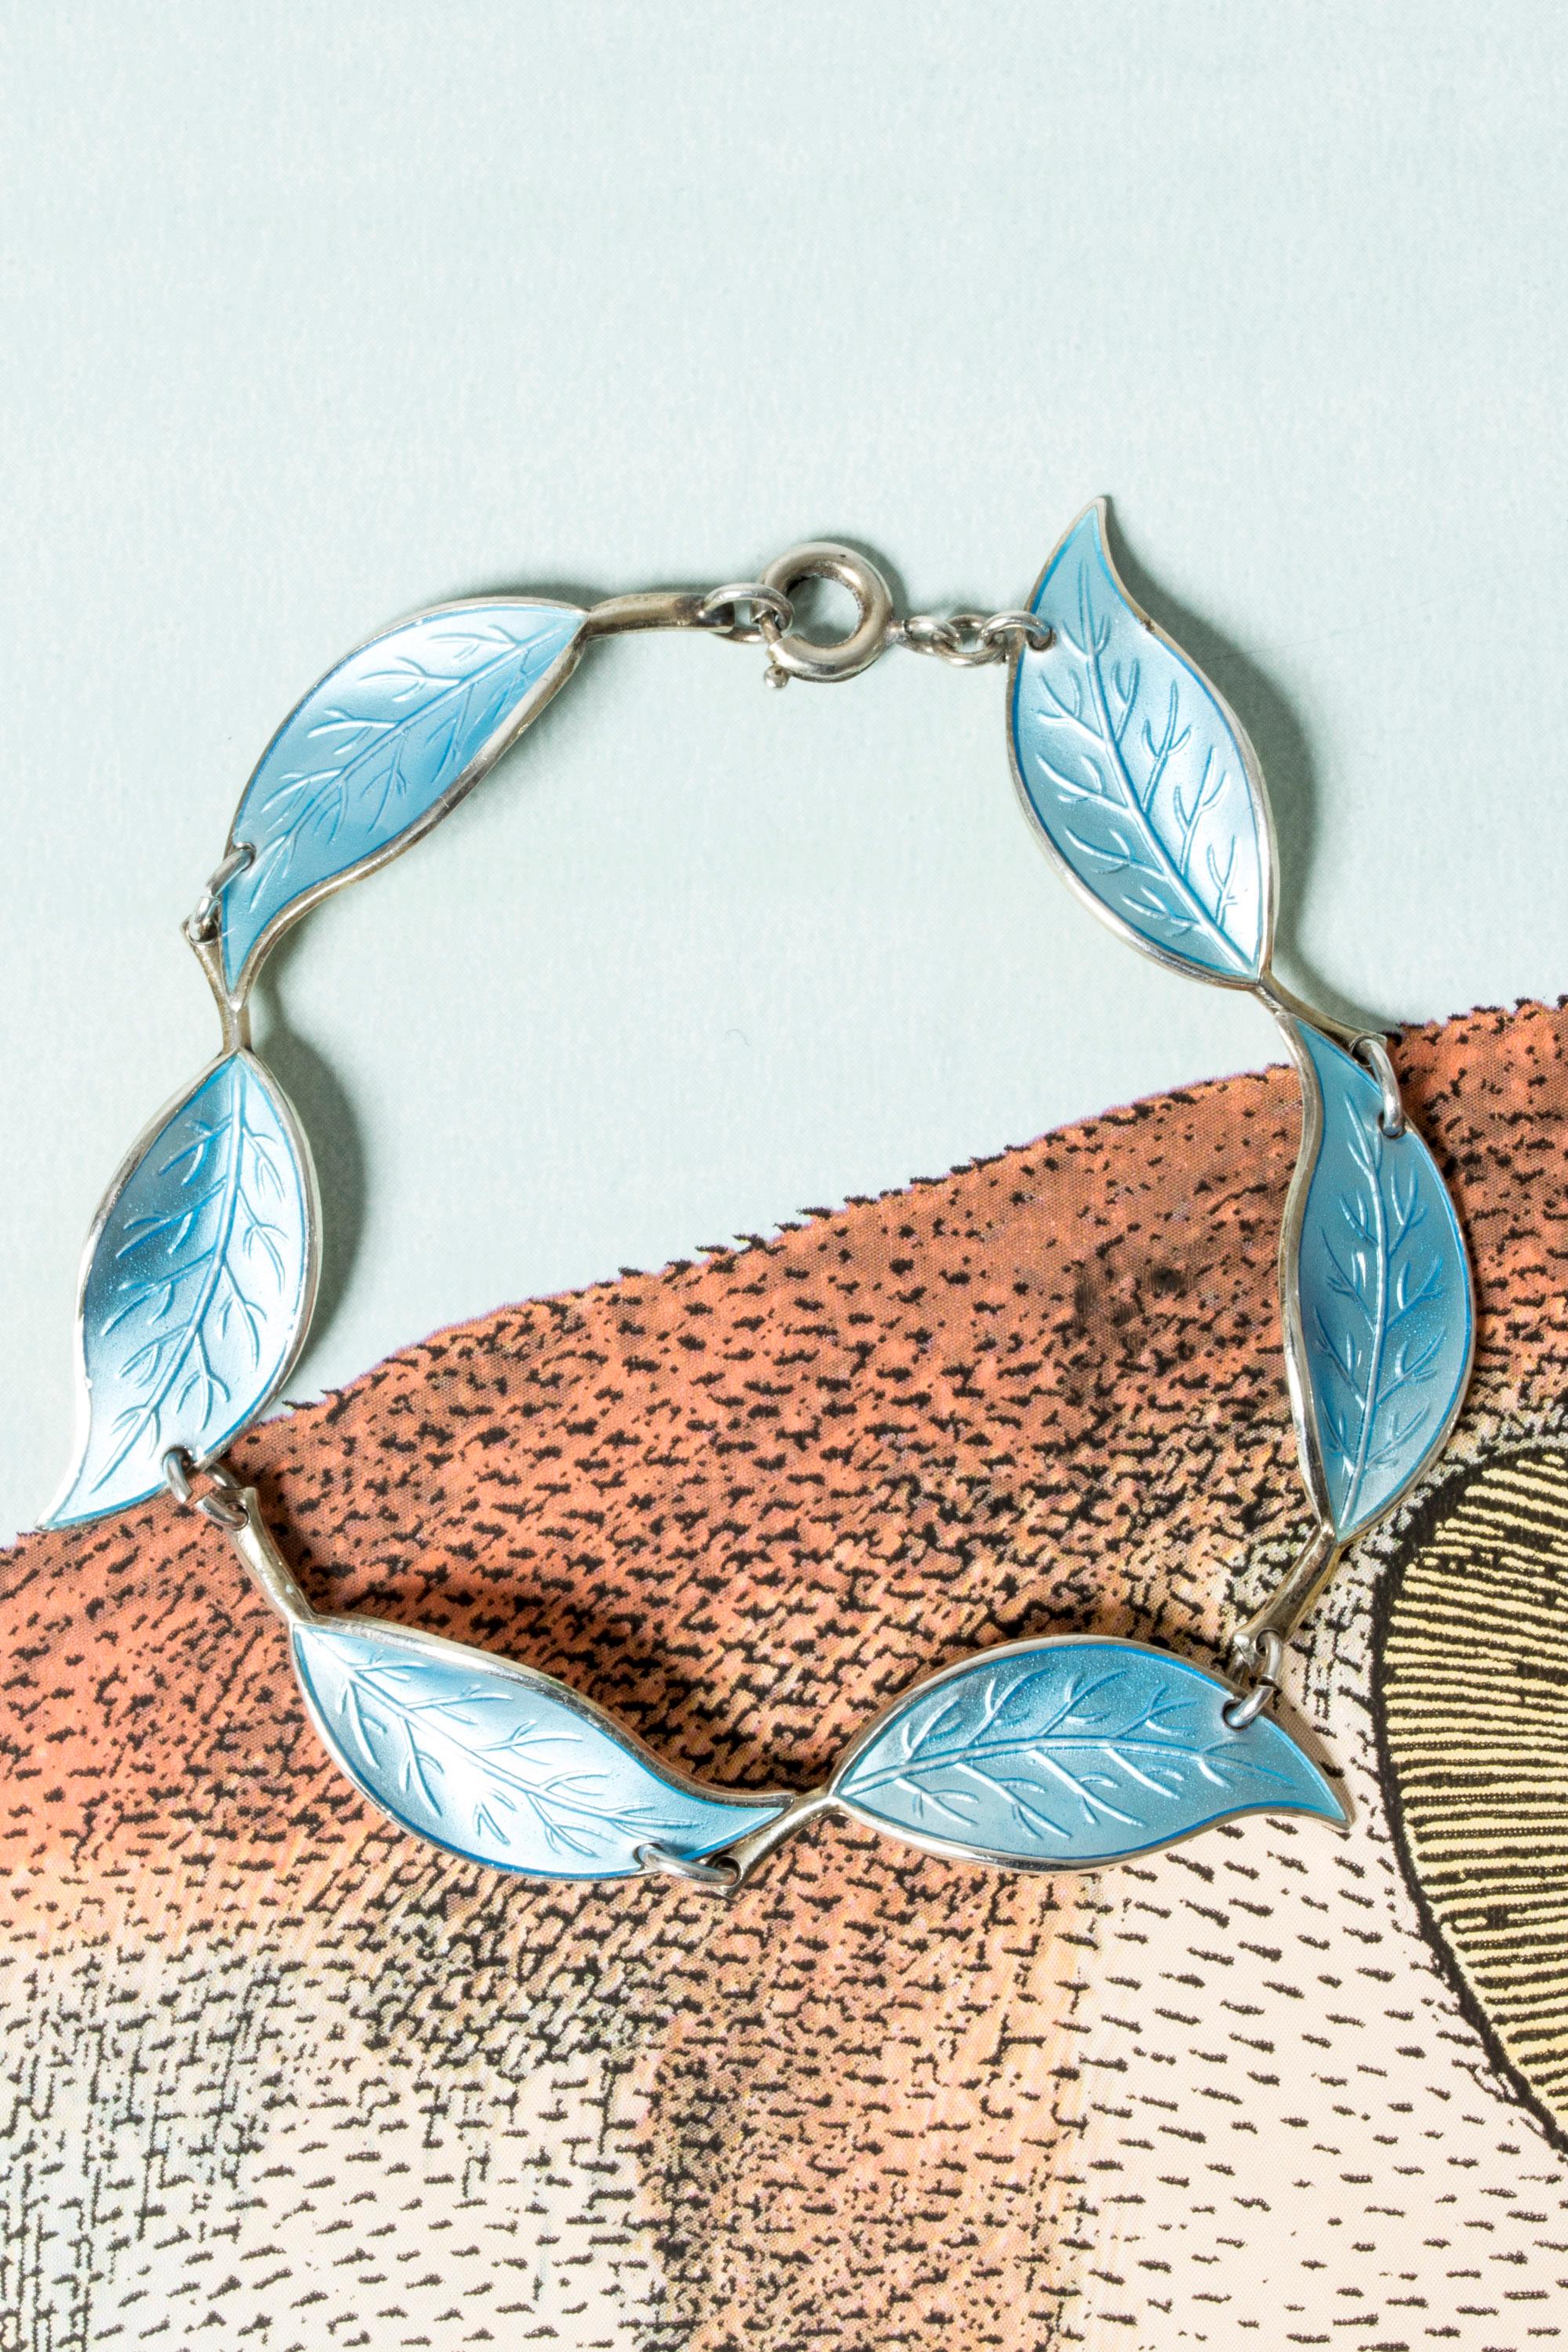 Elegant silver bracelet from David Andersen, in a sweet design of leaves with sky blue enamel. Nice dynamic look in the leaves and attention to detail. Light and easy to wear.